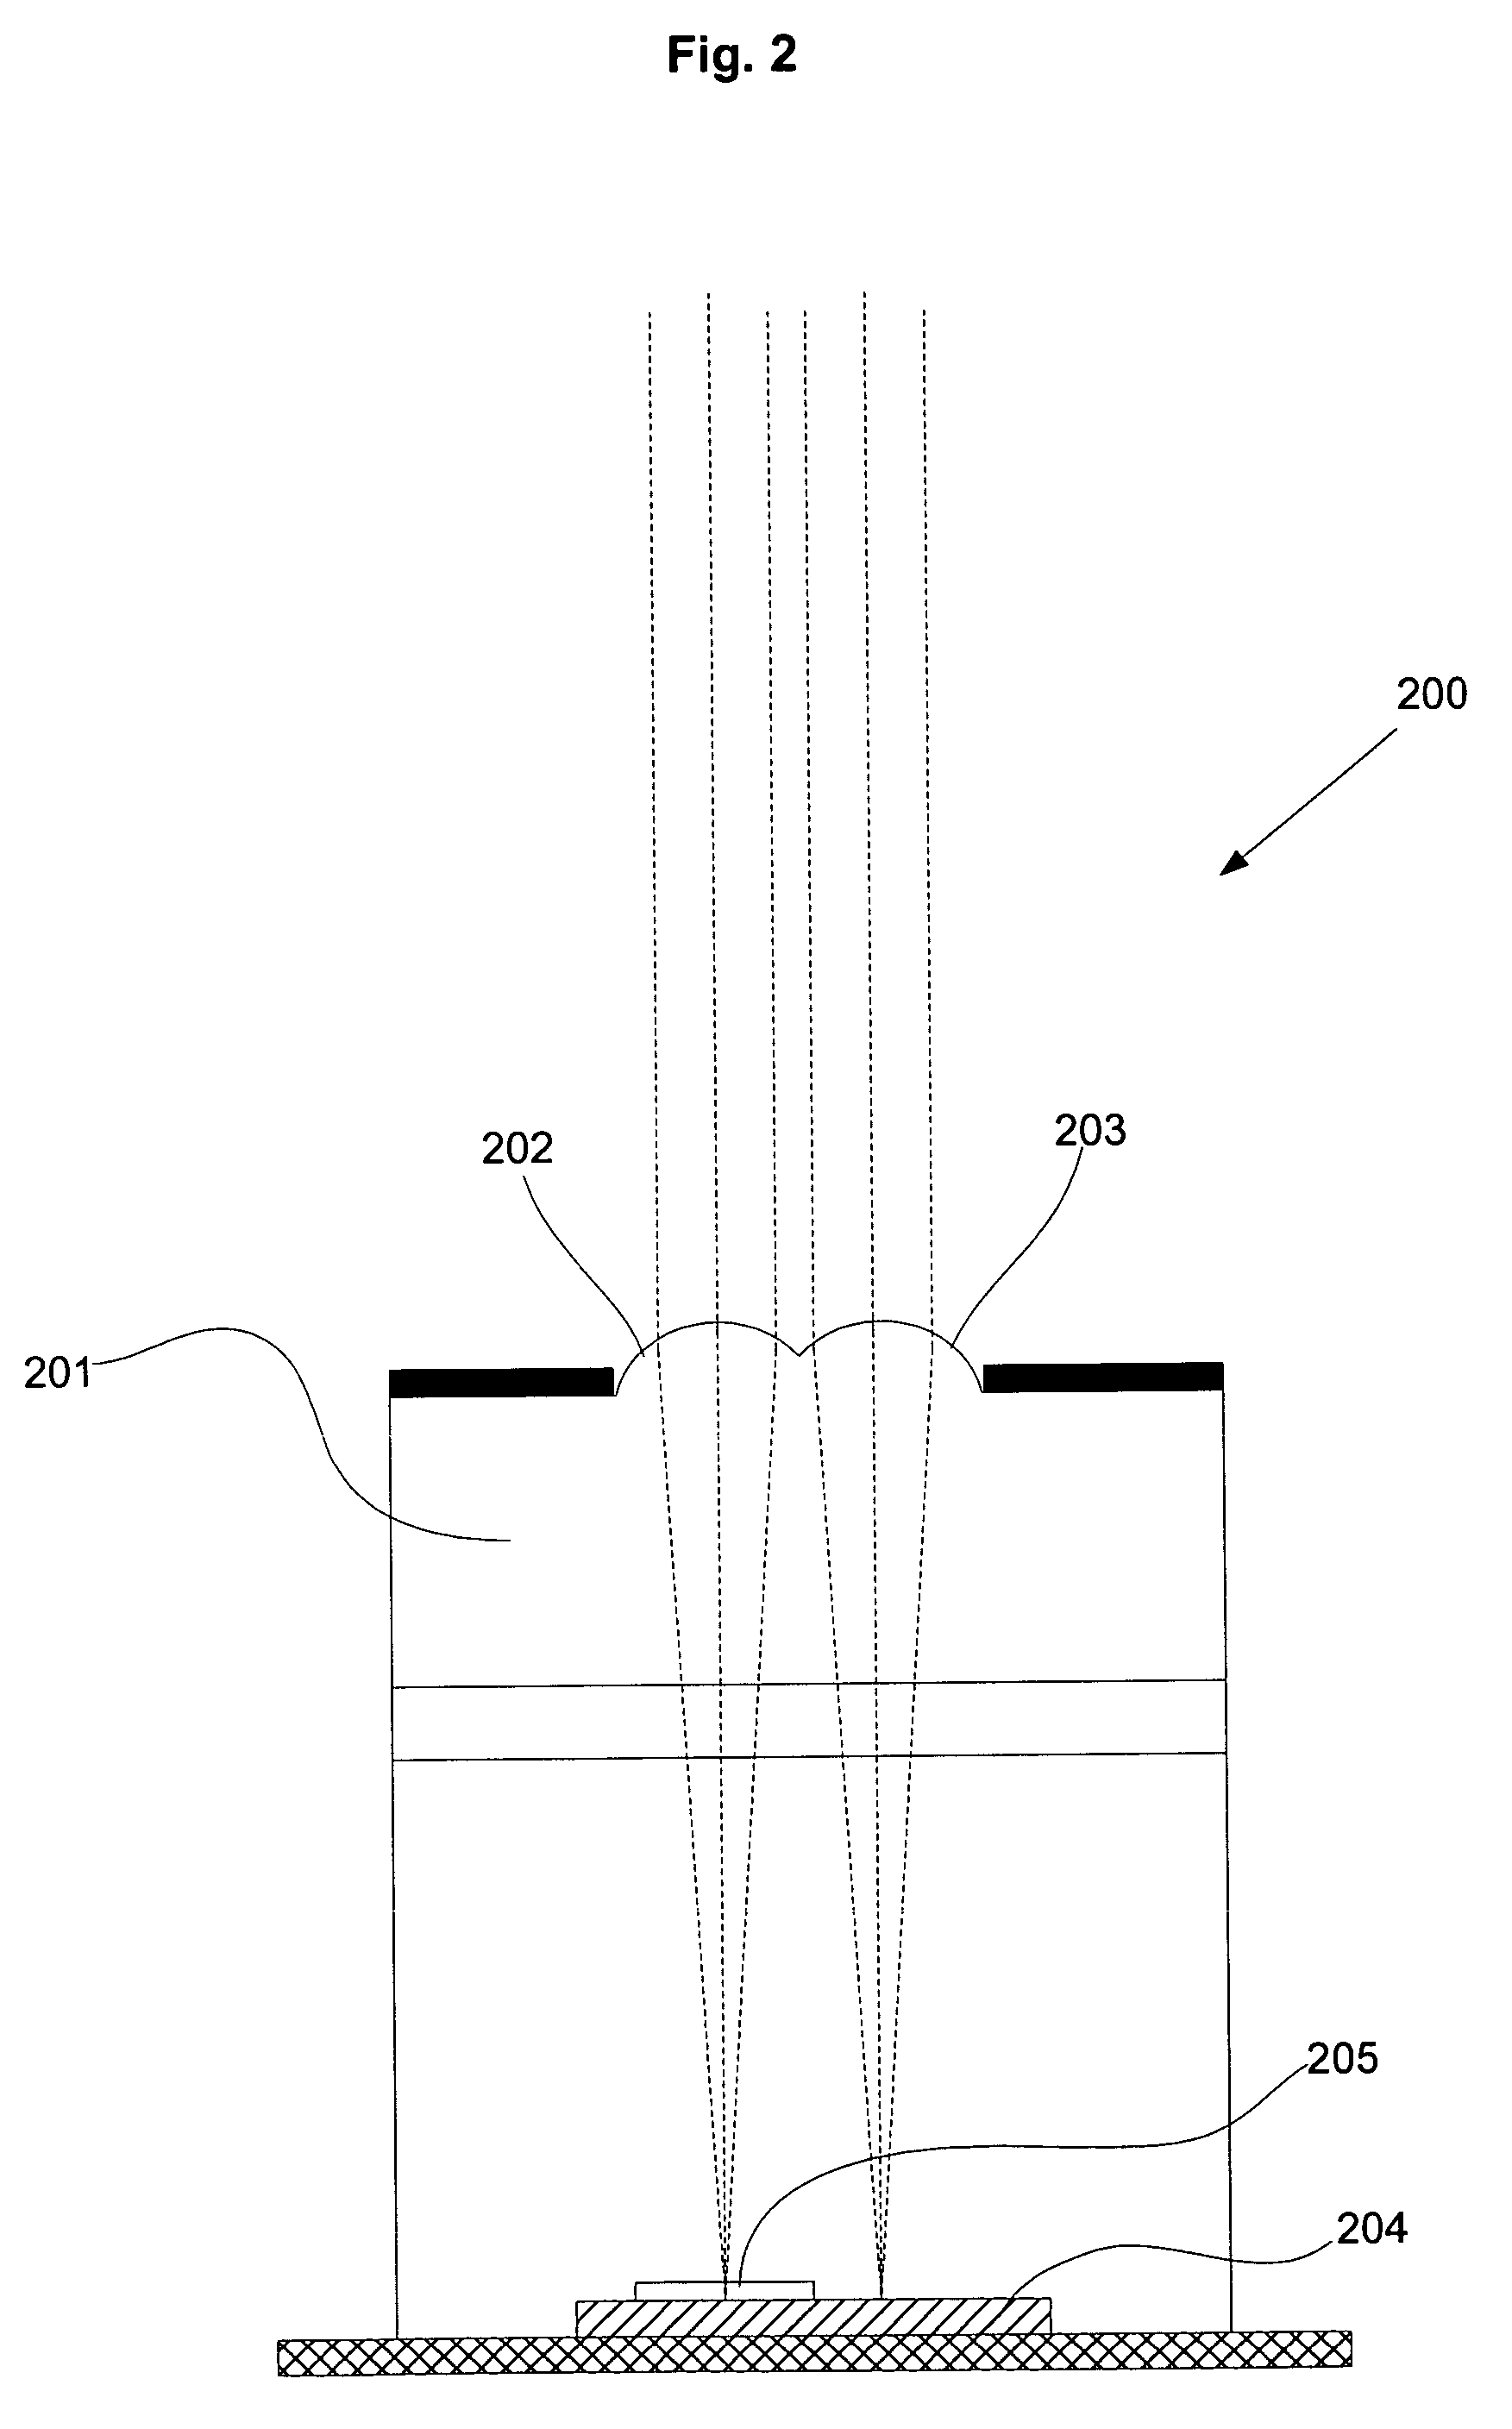 Image acquisition and processing methods for automatic vehicular exterior lighting control